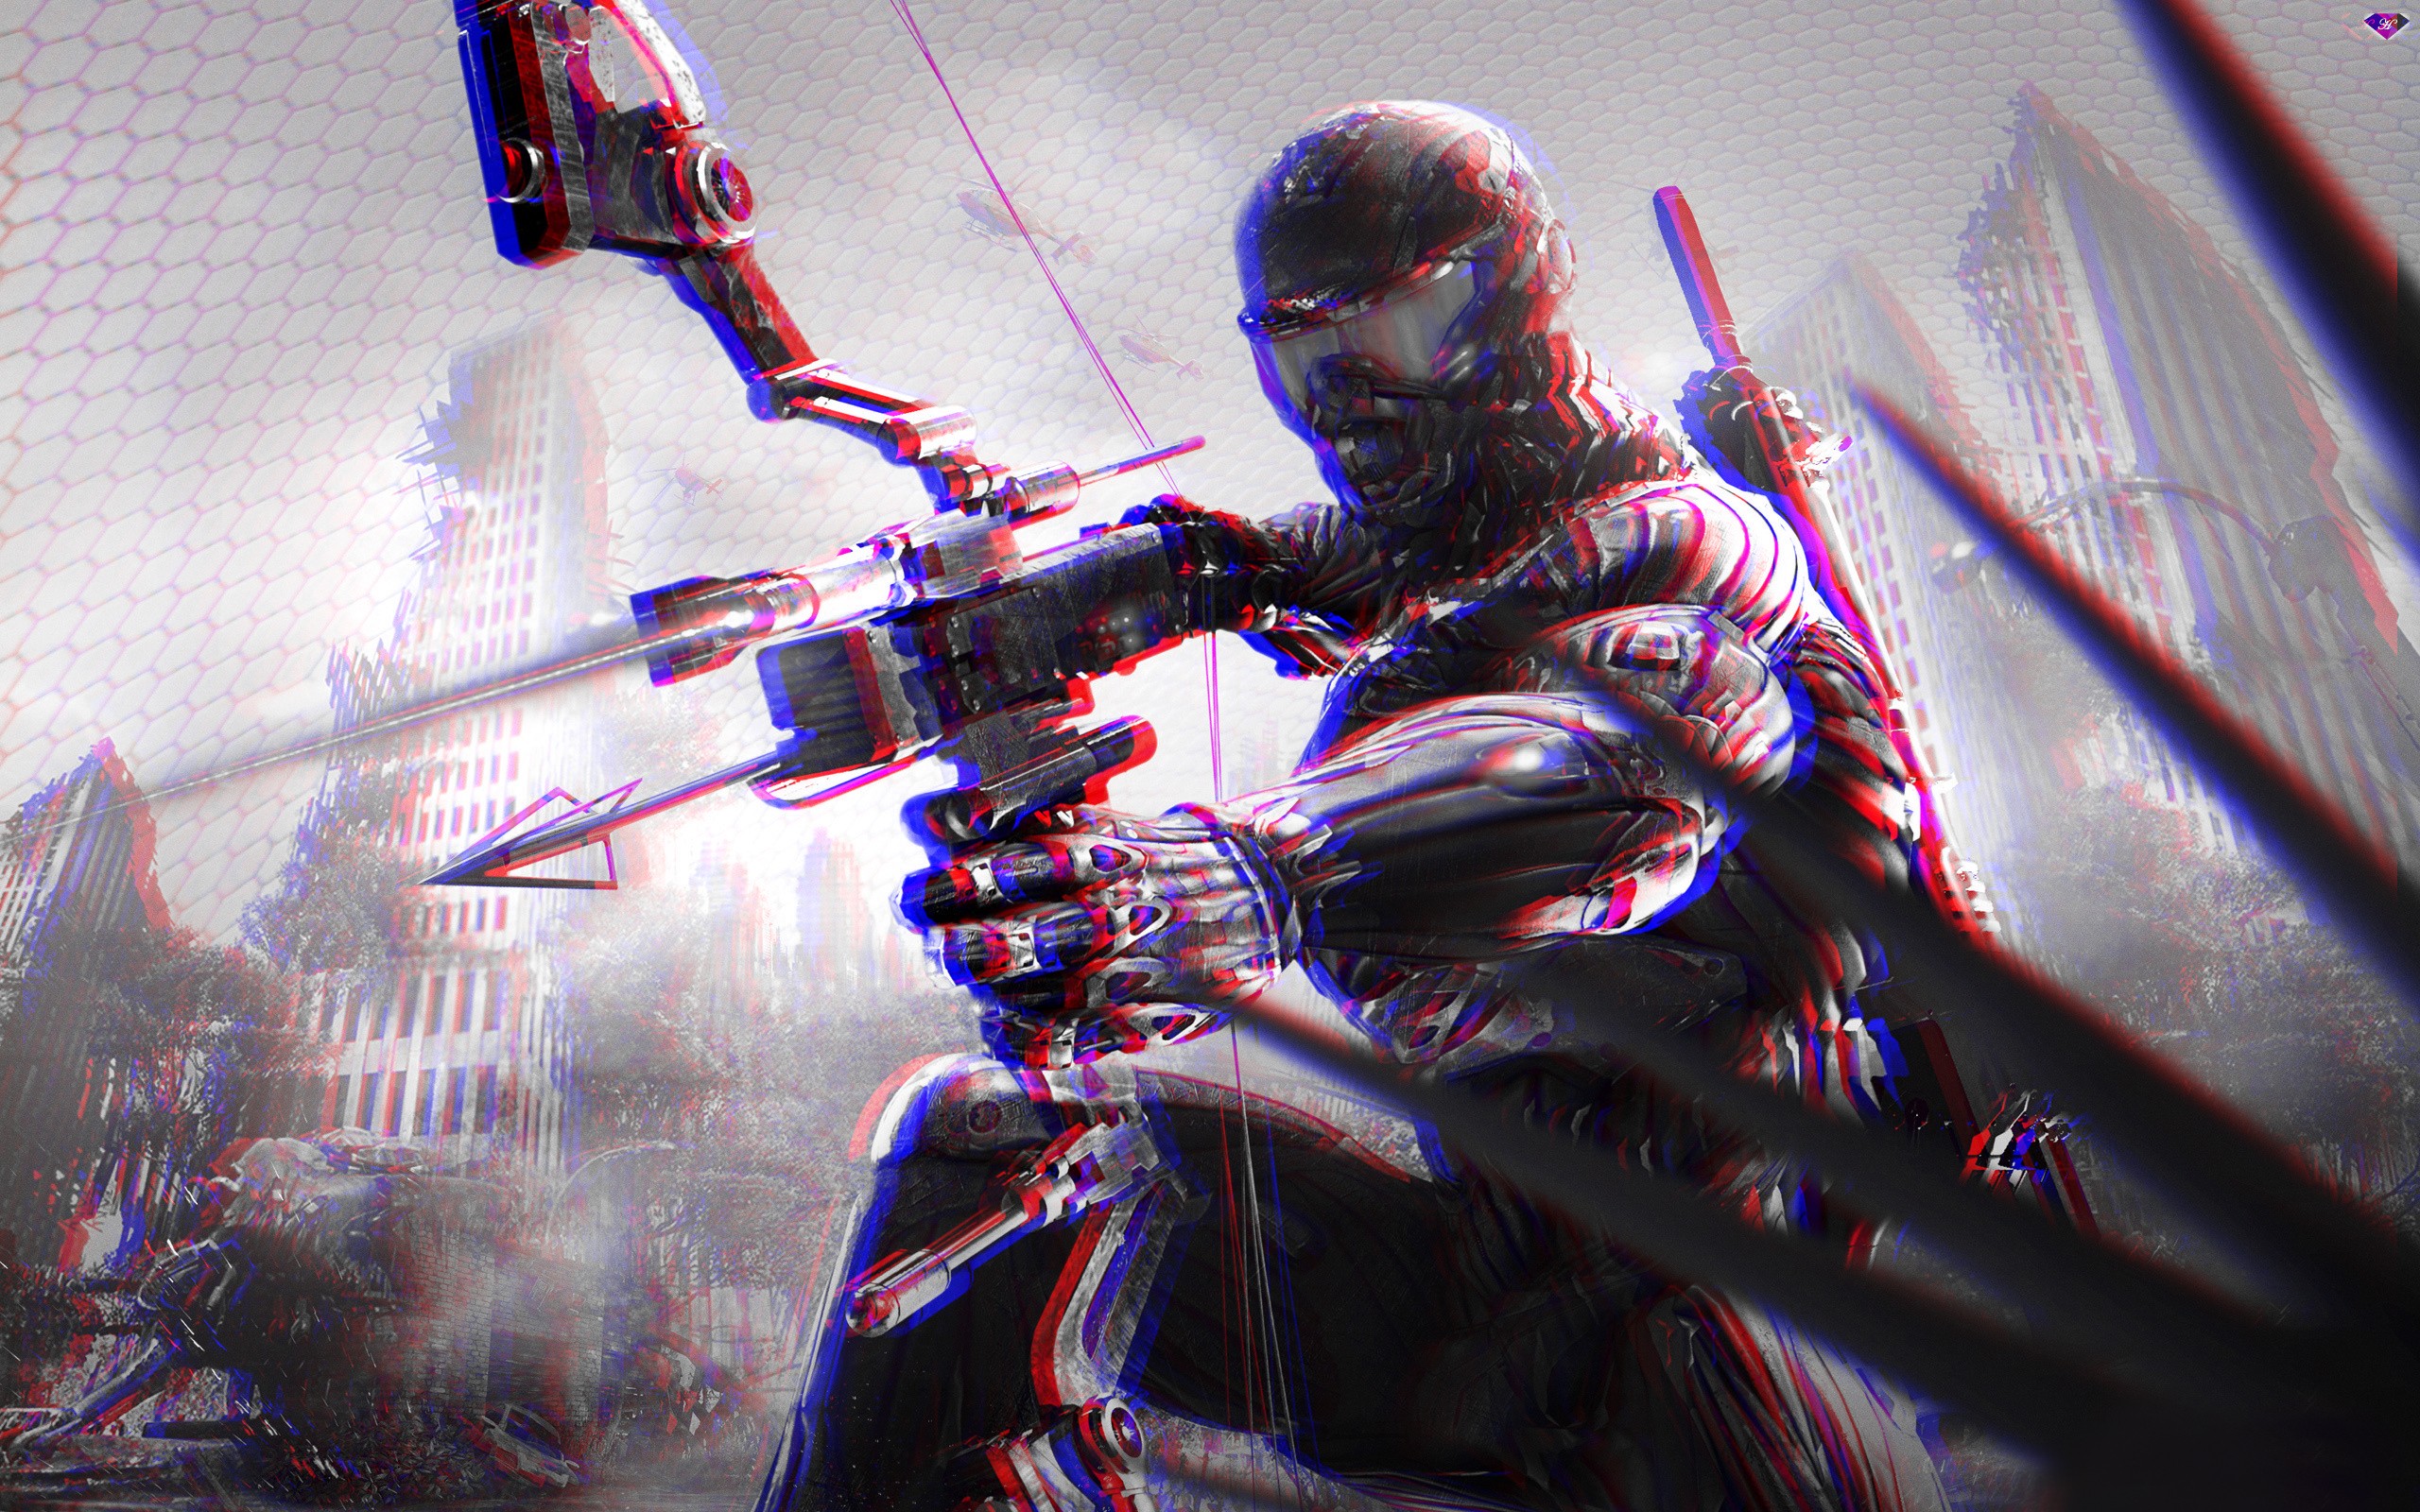 General 2560x1600 CGI anaglyph 3D Crysis 2 video games